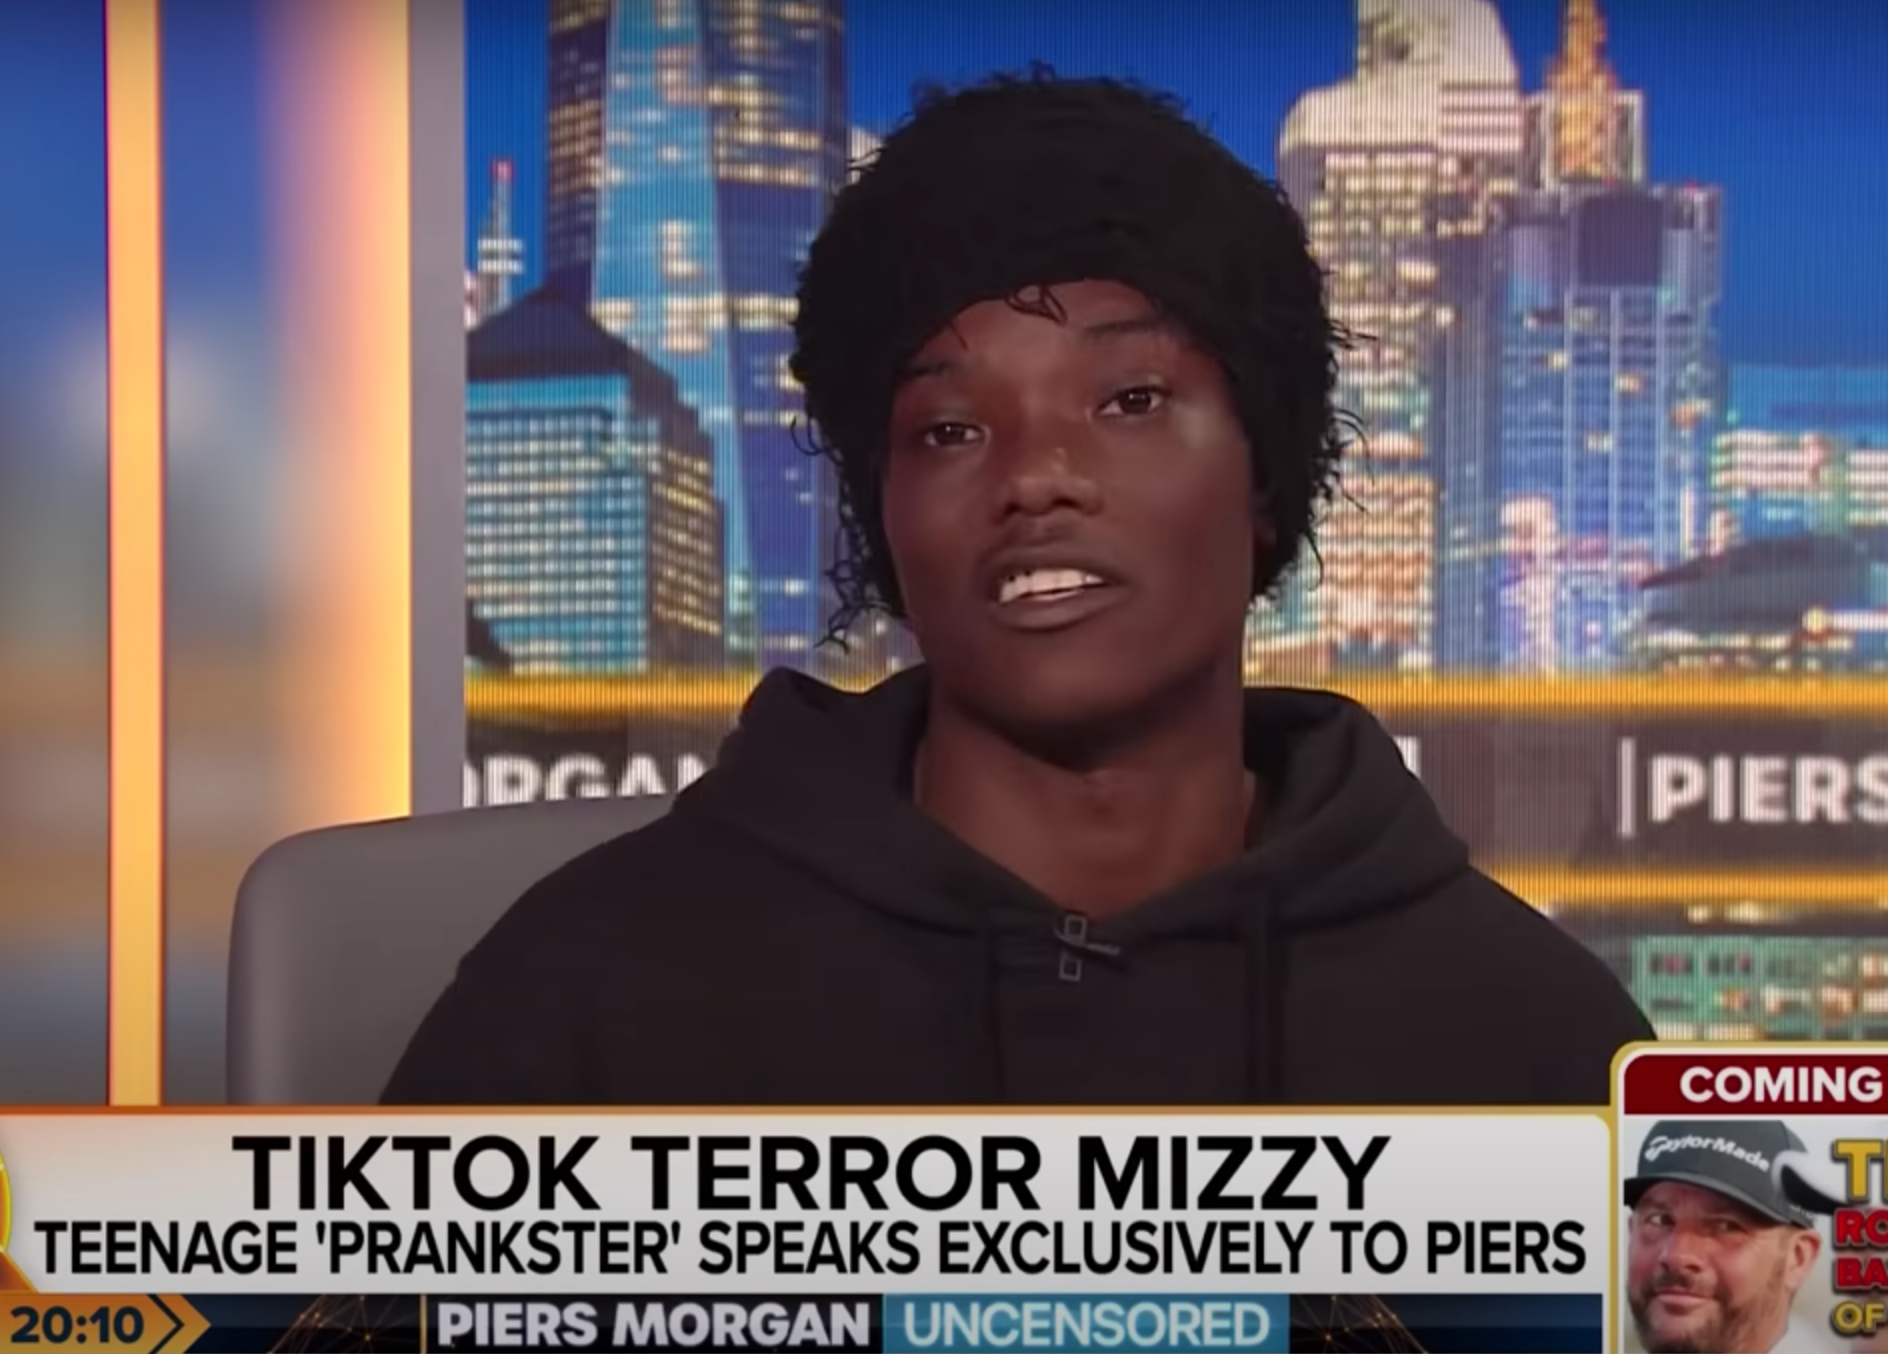 Mizzy told Piers Morgan it was ‘not my fault’ that UK laws are ‘weak'